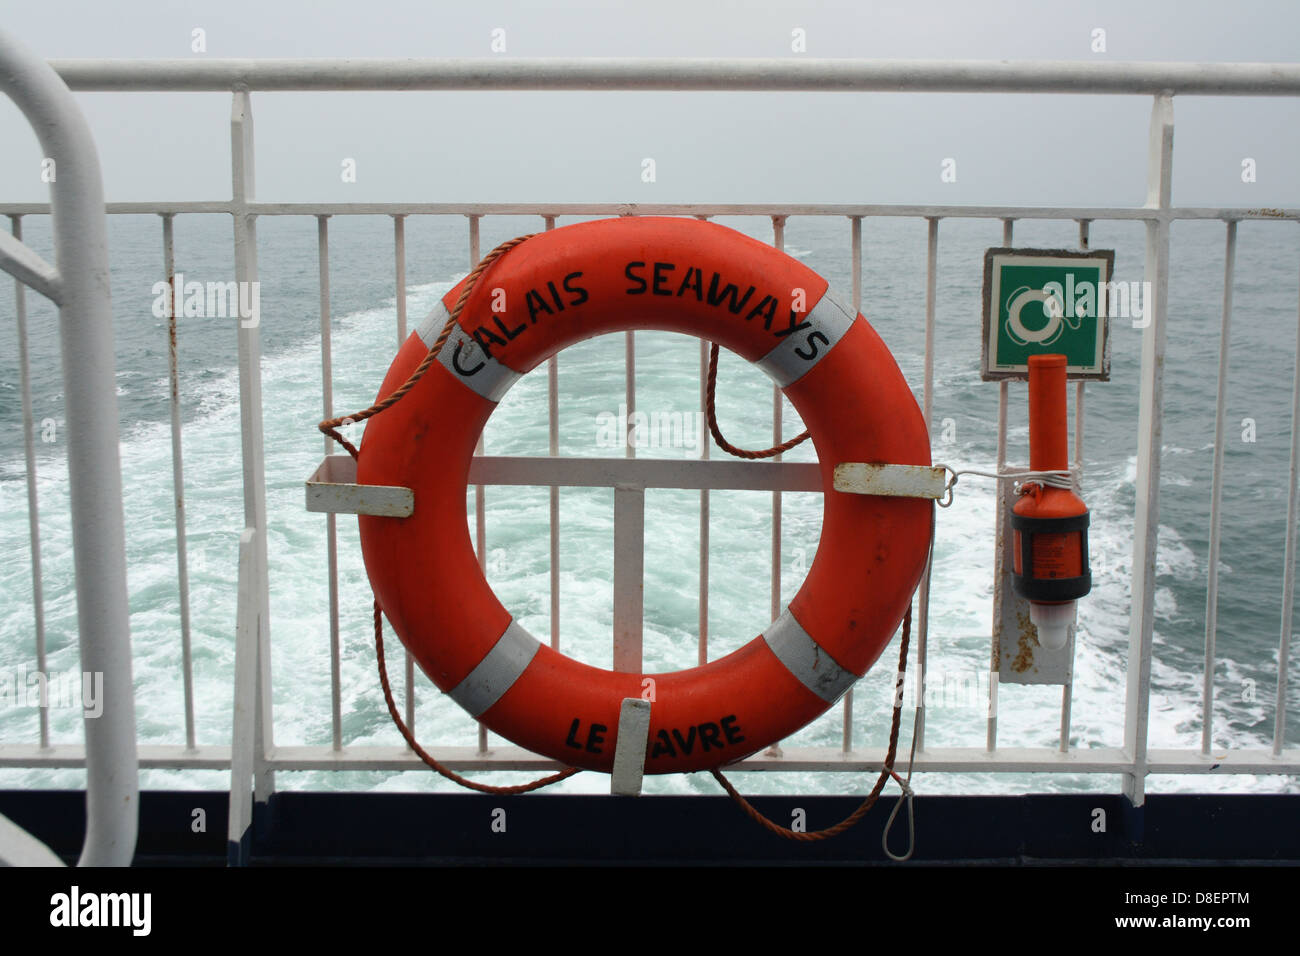 Rubber ring buoy on a ferry boat. Stock Photo